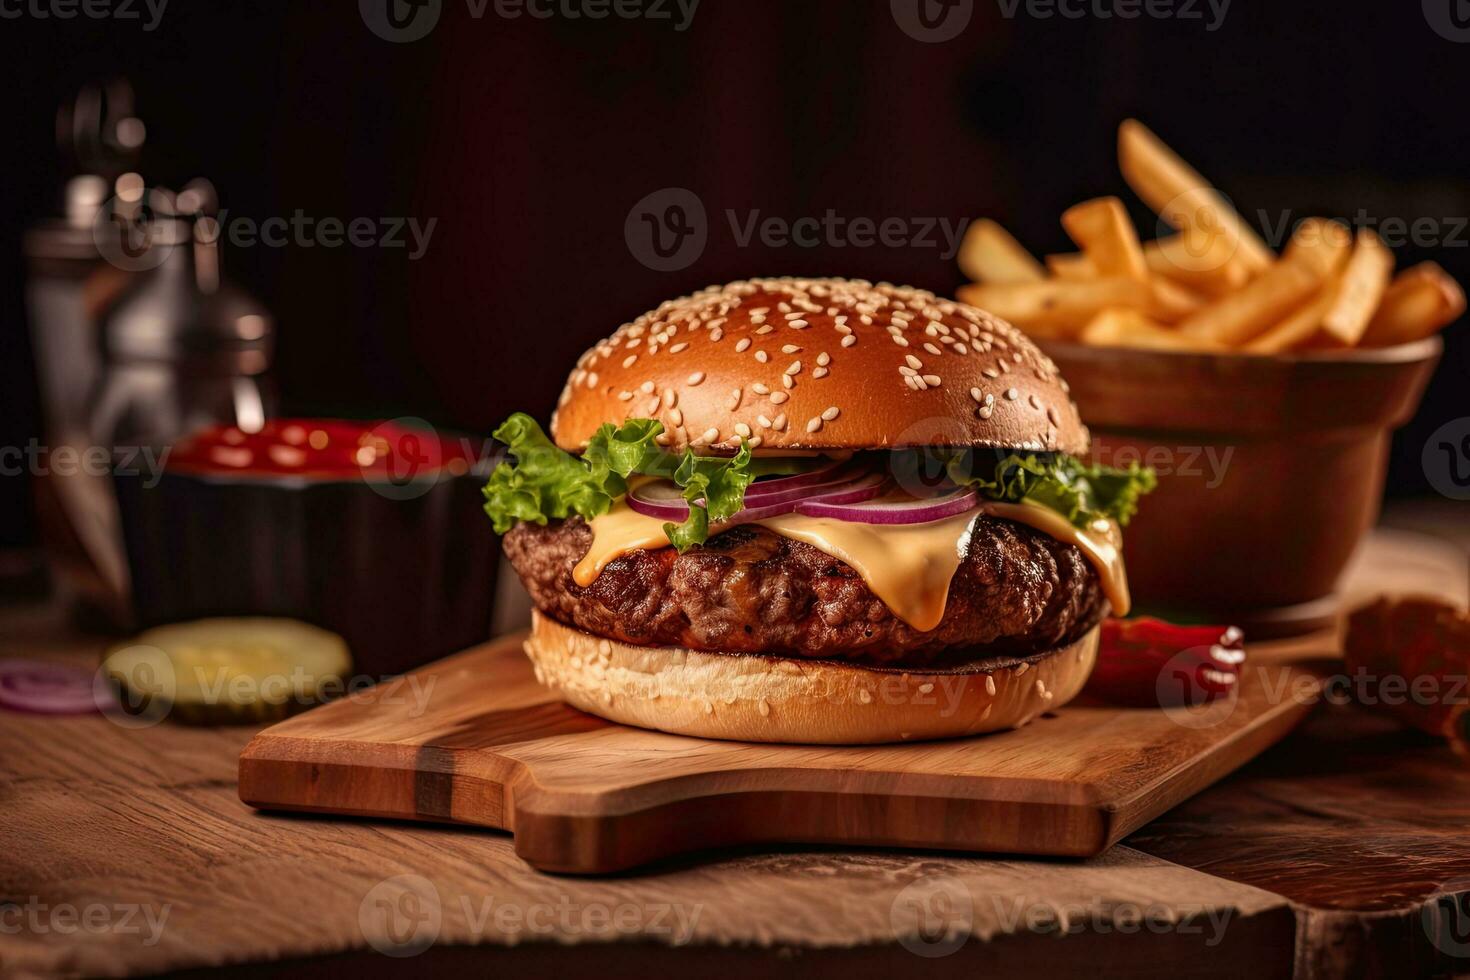 Cheese burger - American cheese burger with Golden French fries on wooden background photo